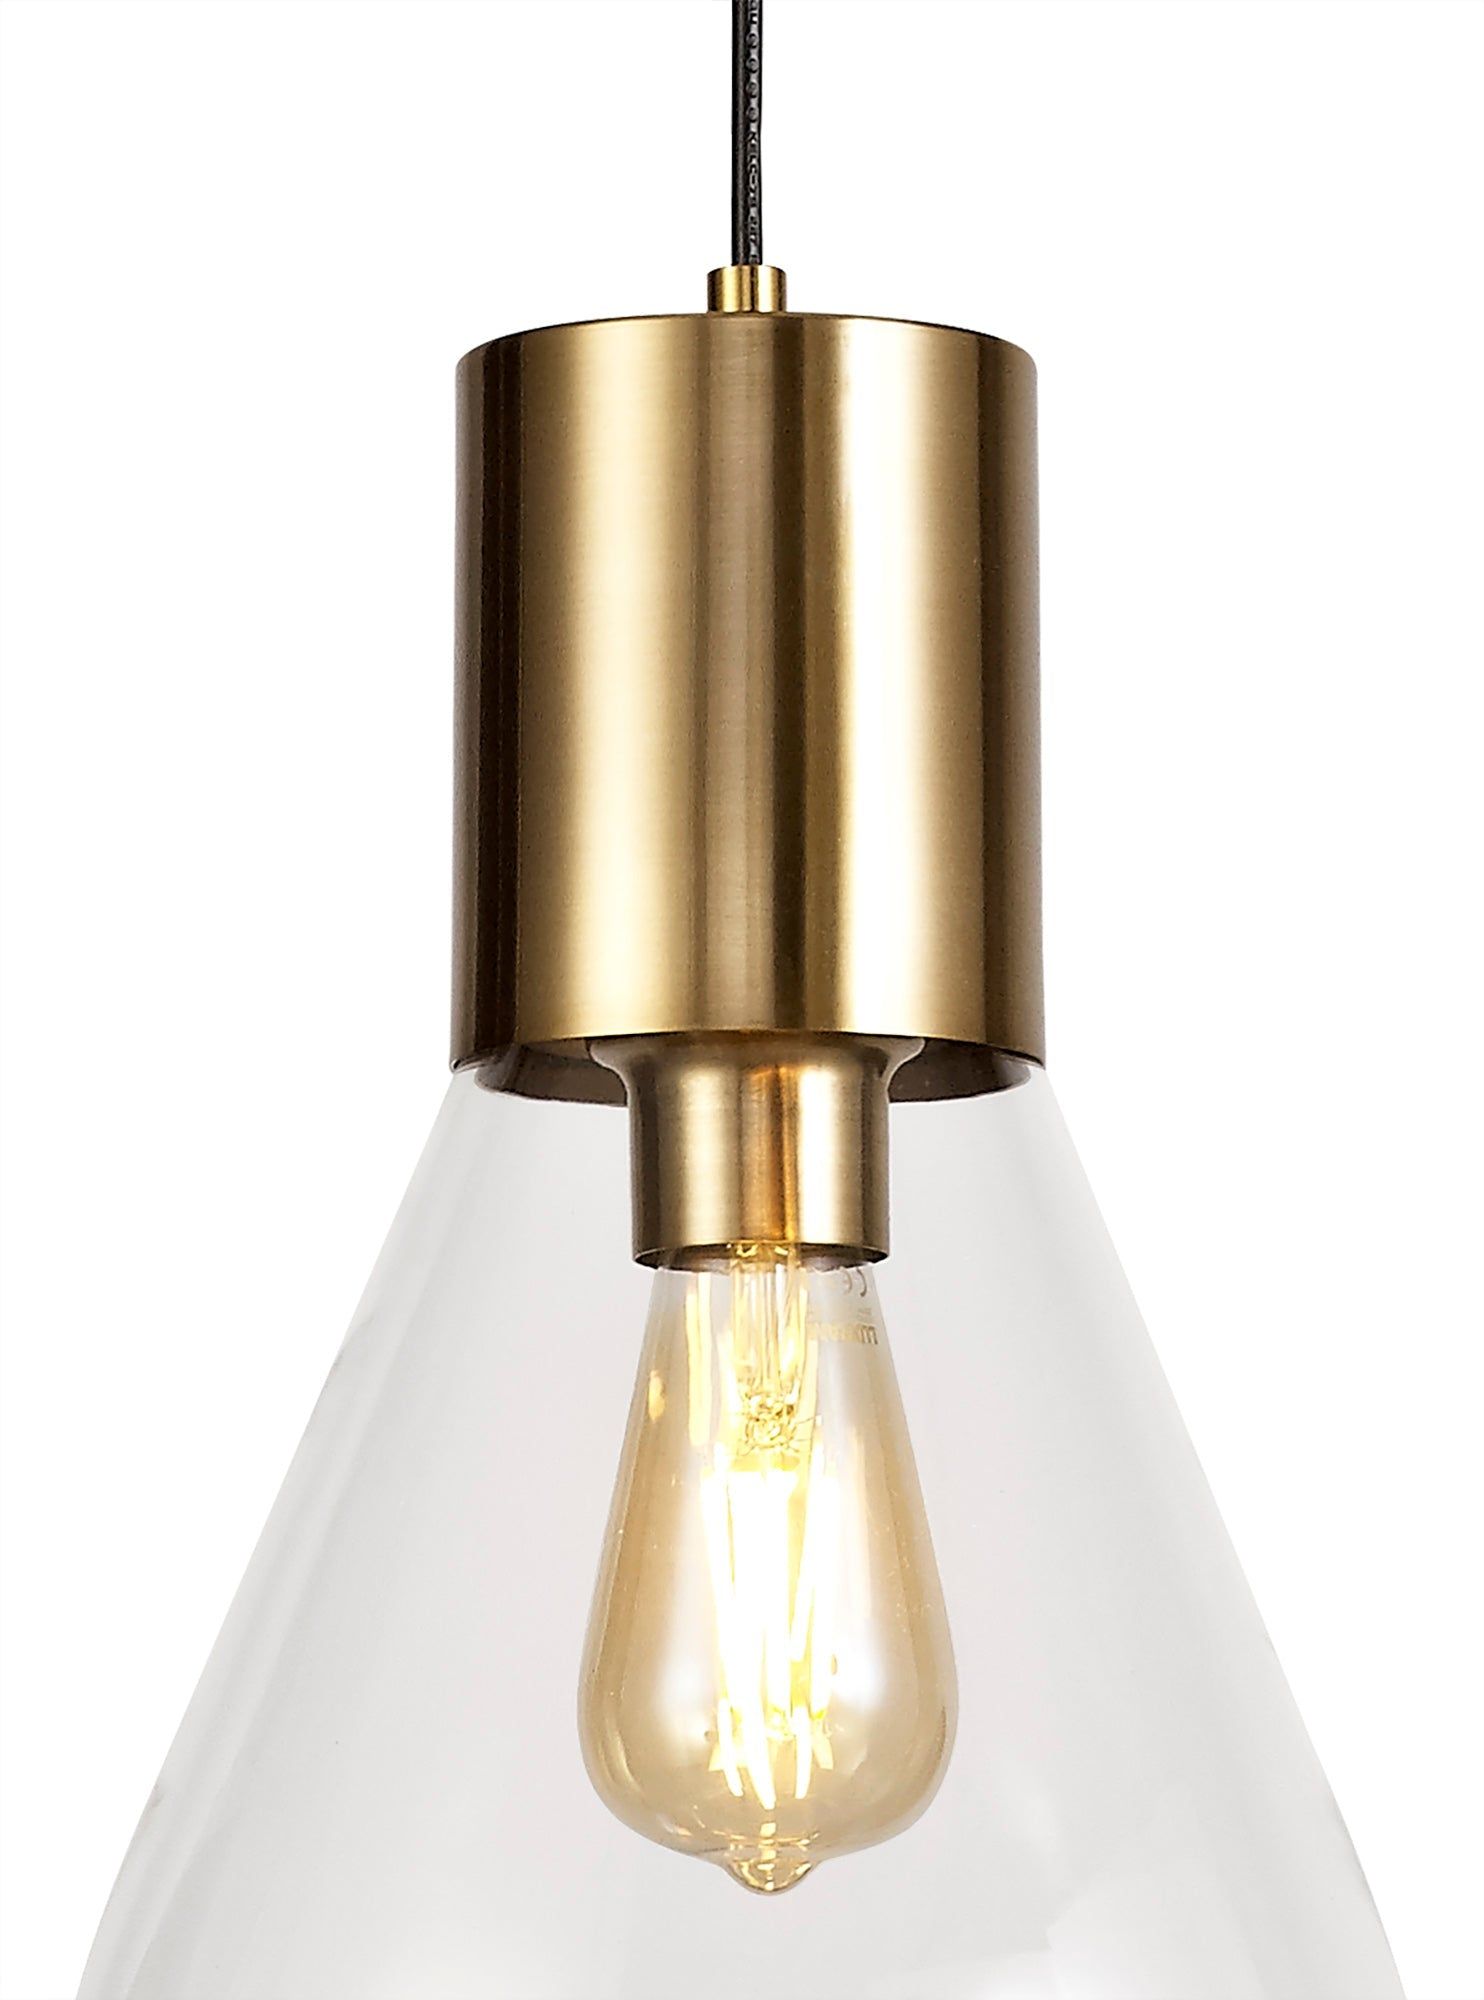 Tuomeb Narrow Pendant, 1 x E27, Ancient Brass/Clear Glass/Satin Nickel/Opal Glass & Clear Twisted Cable